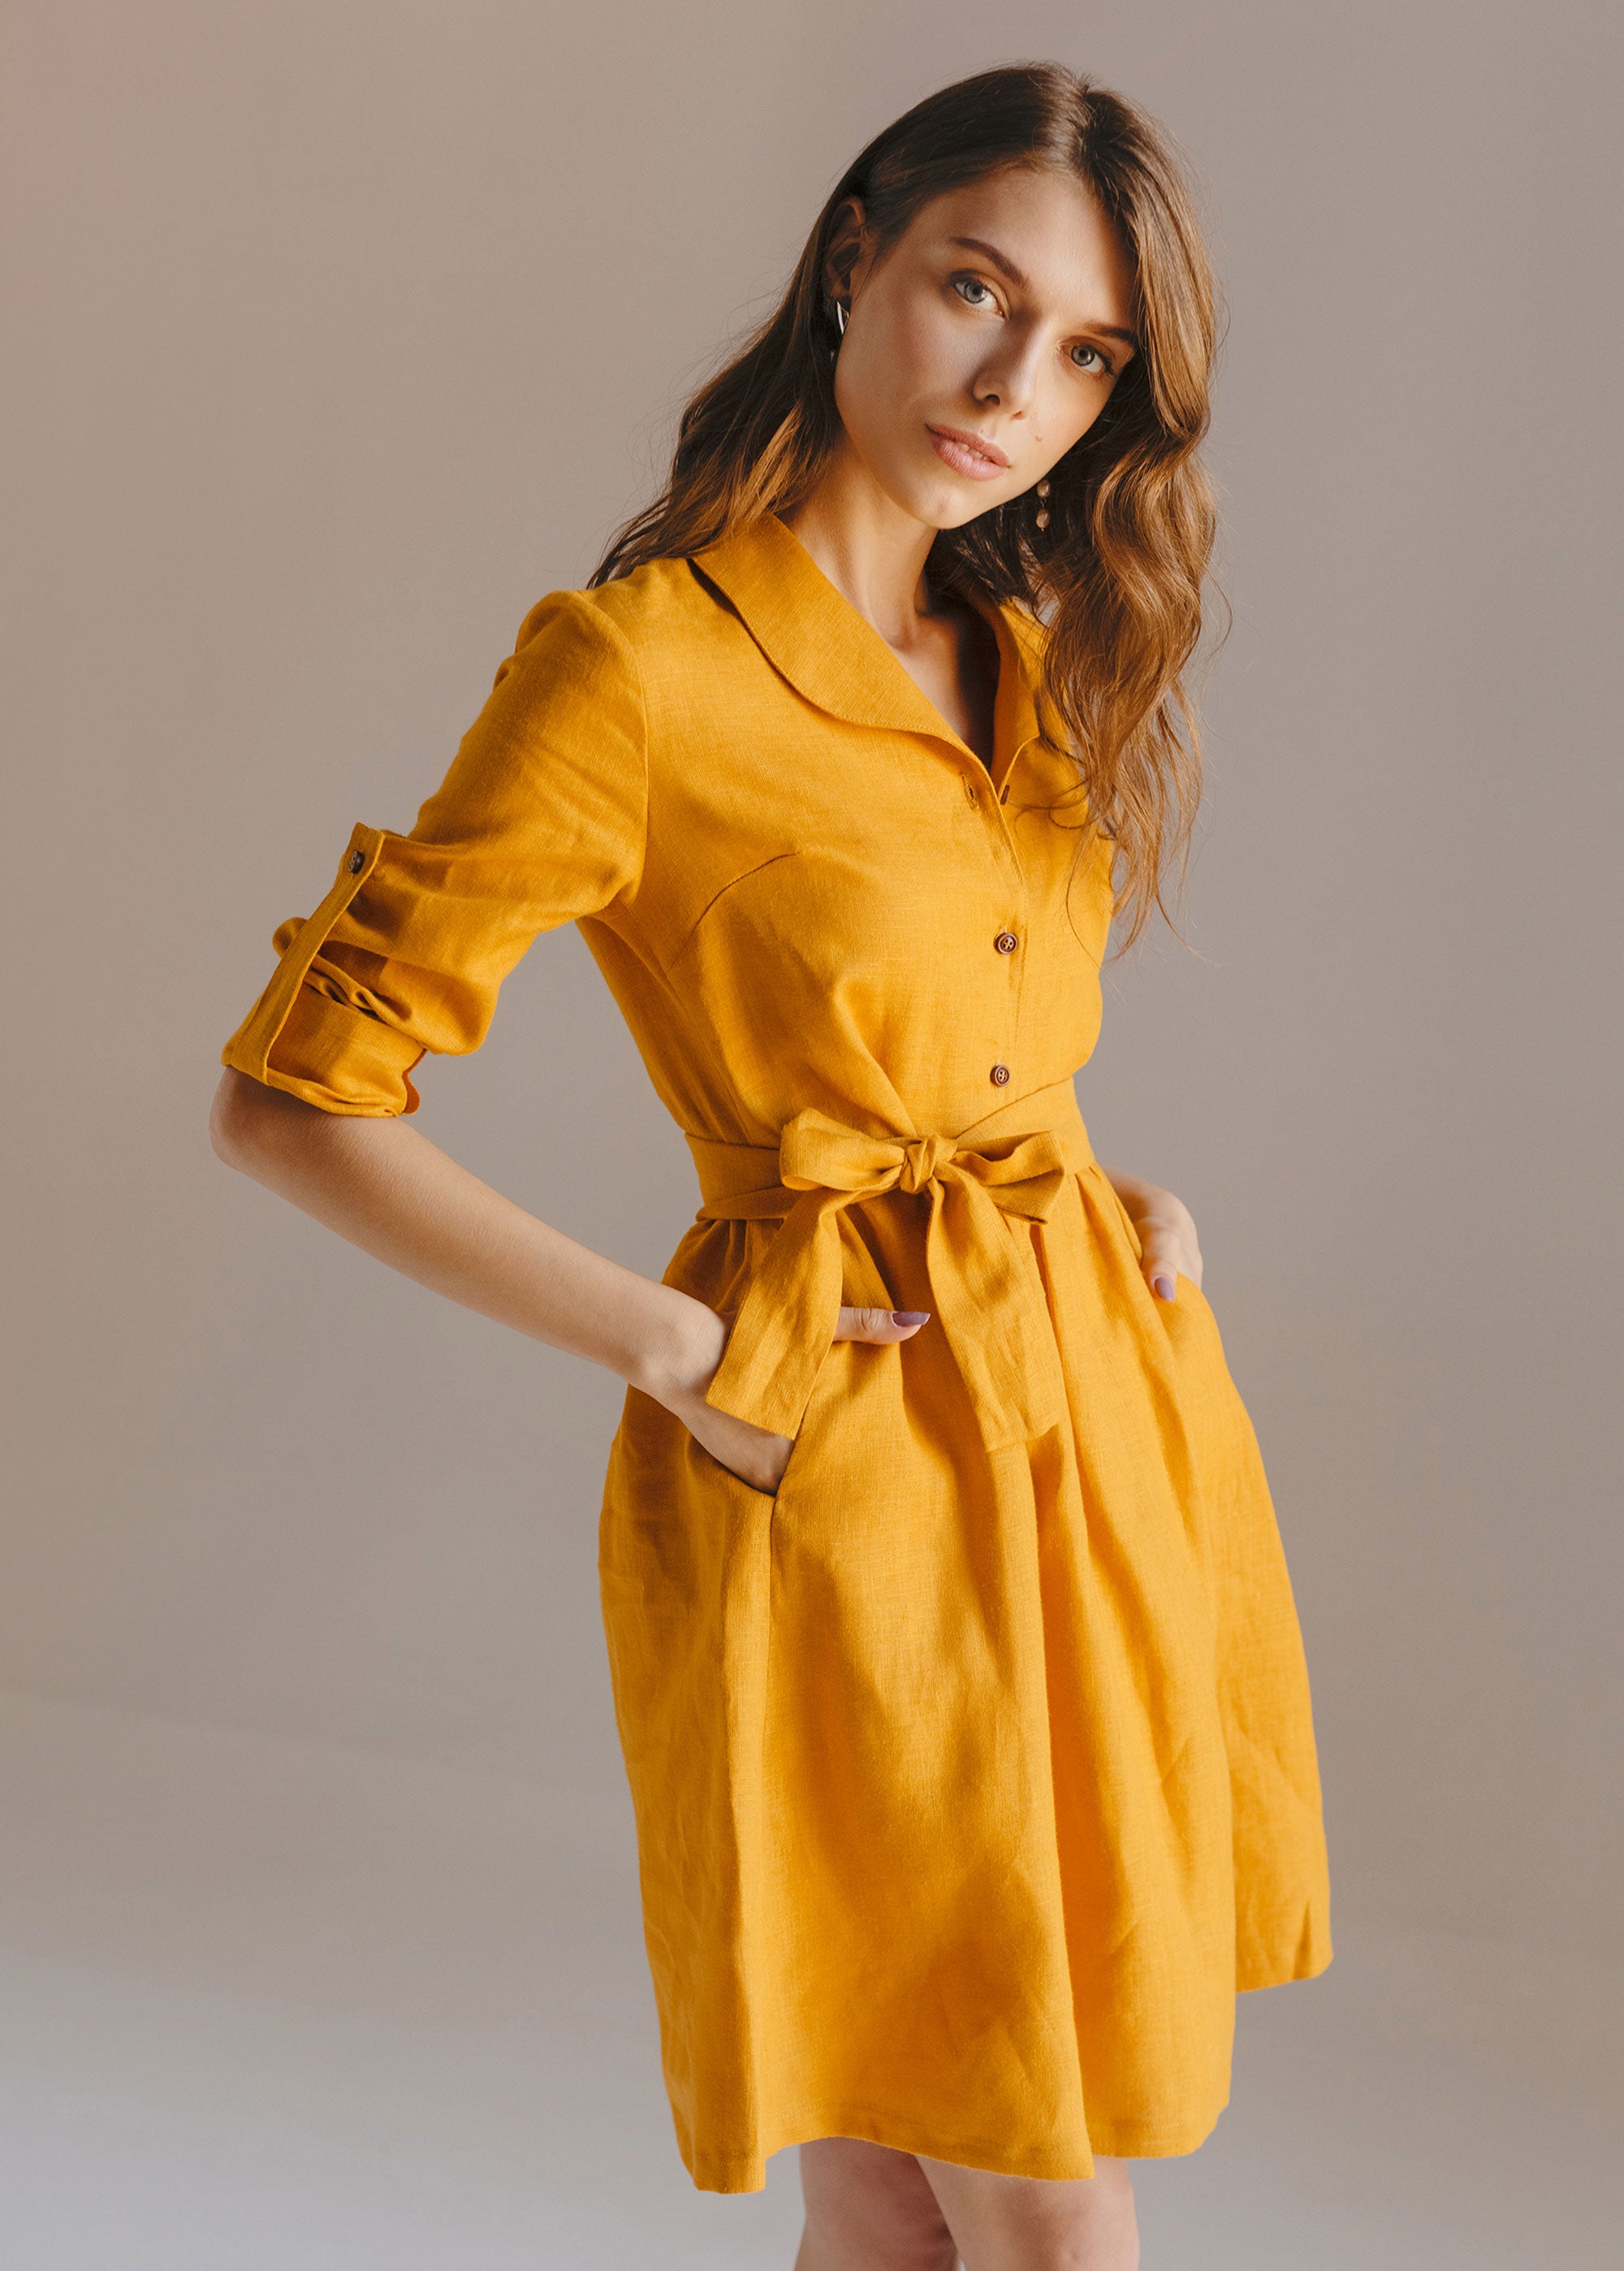 “Lily” Mustard Yellow Mini Dress with buttons